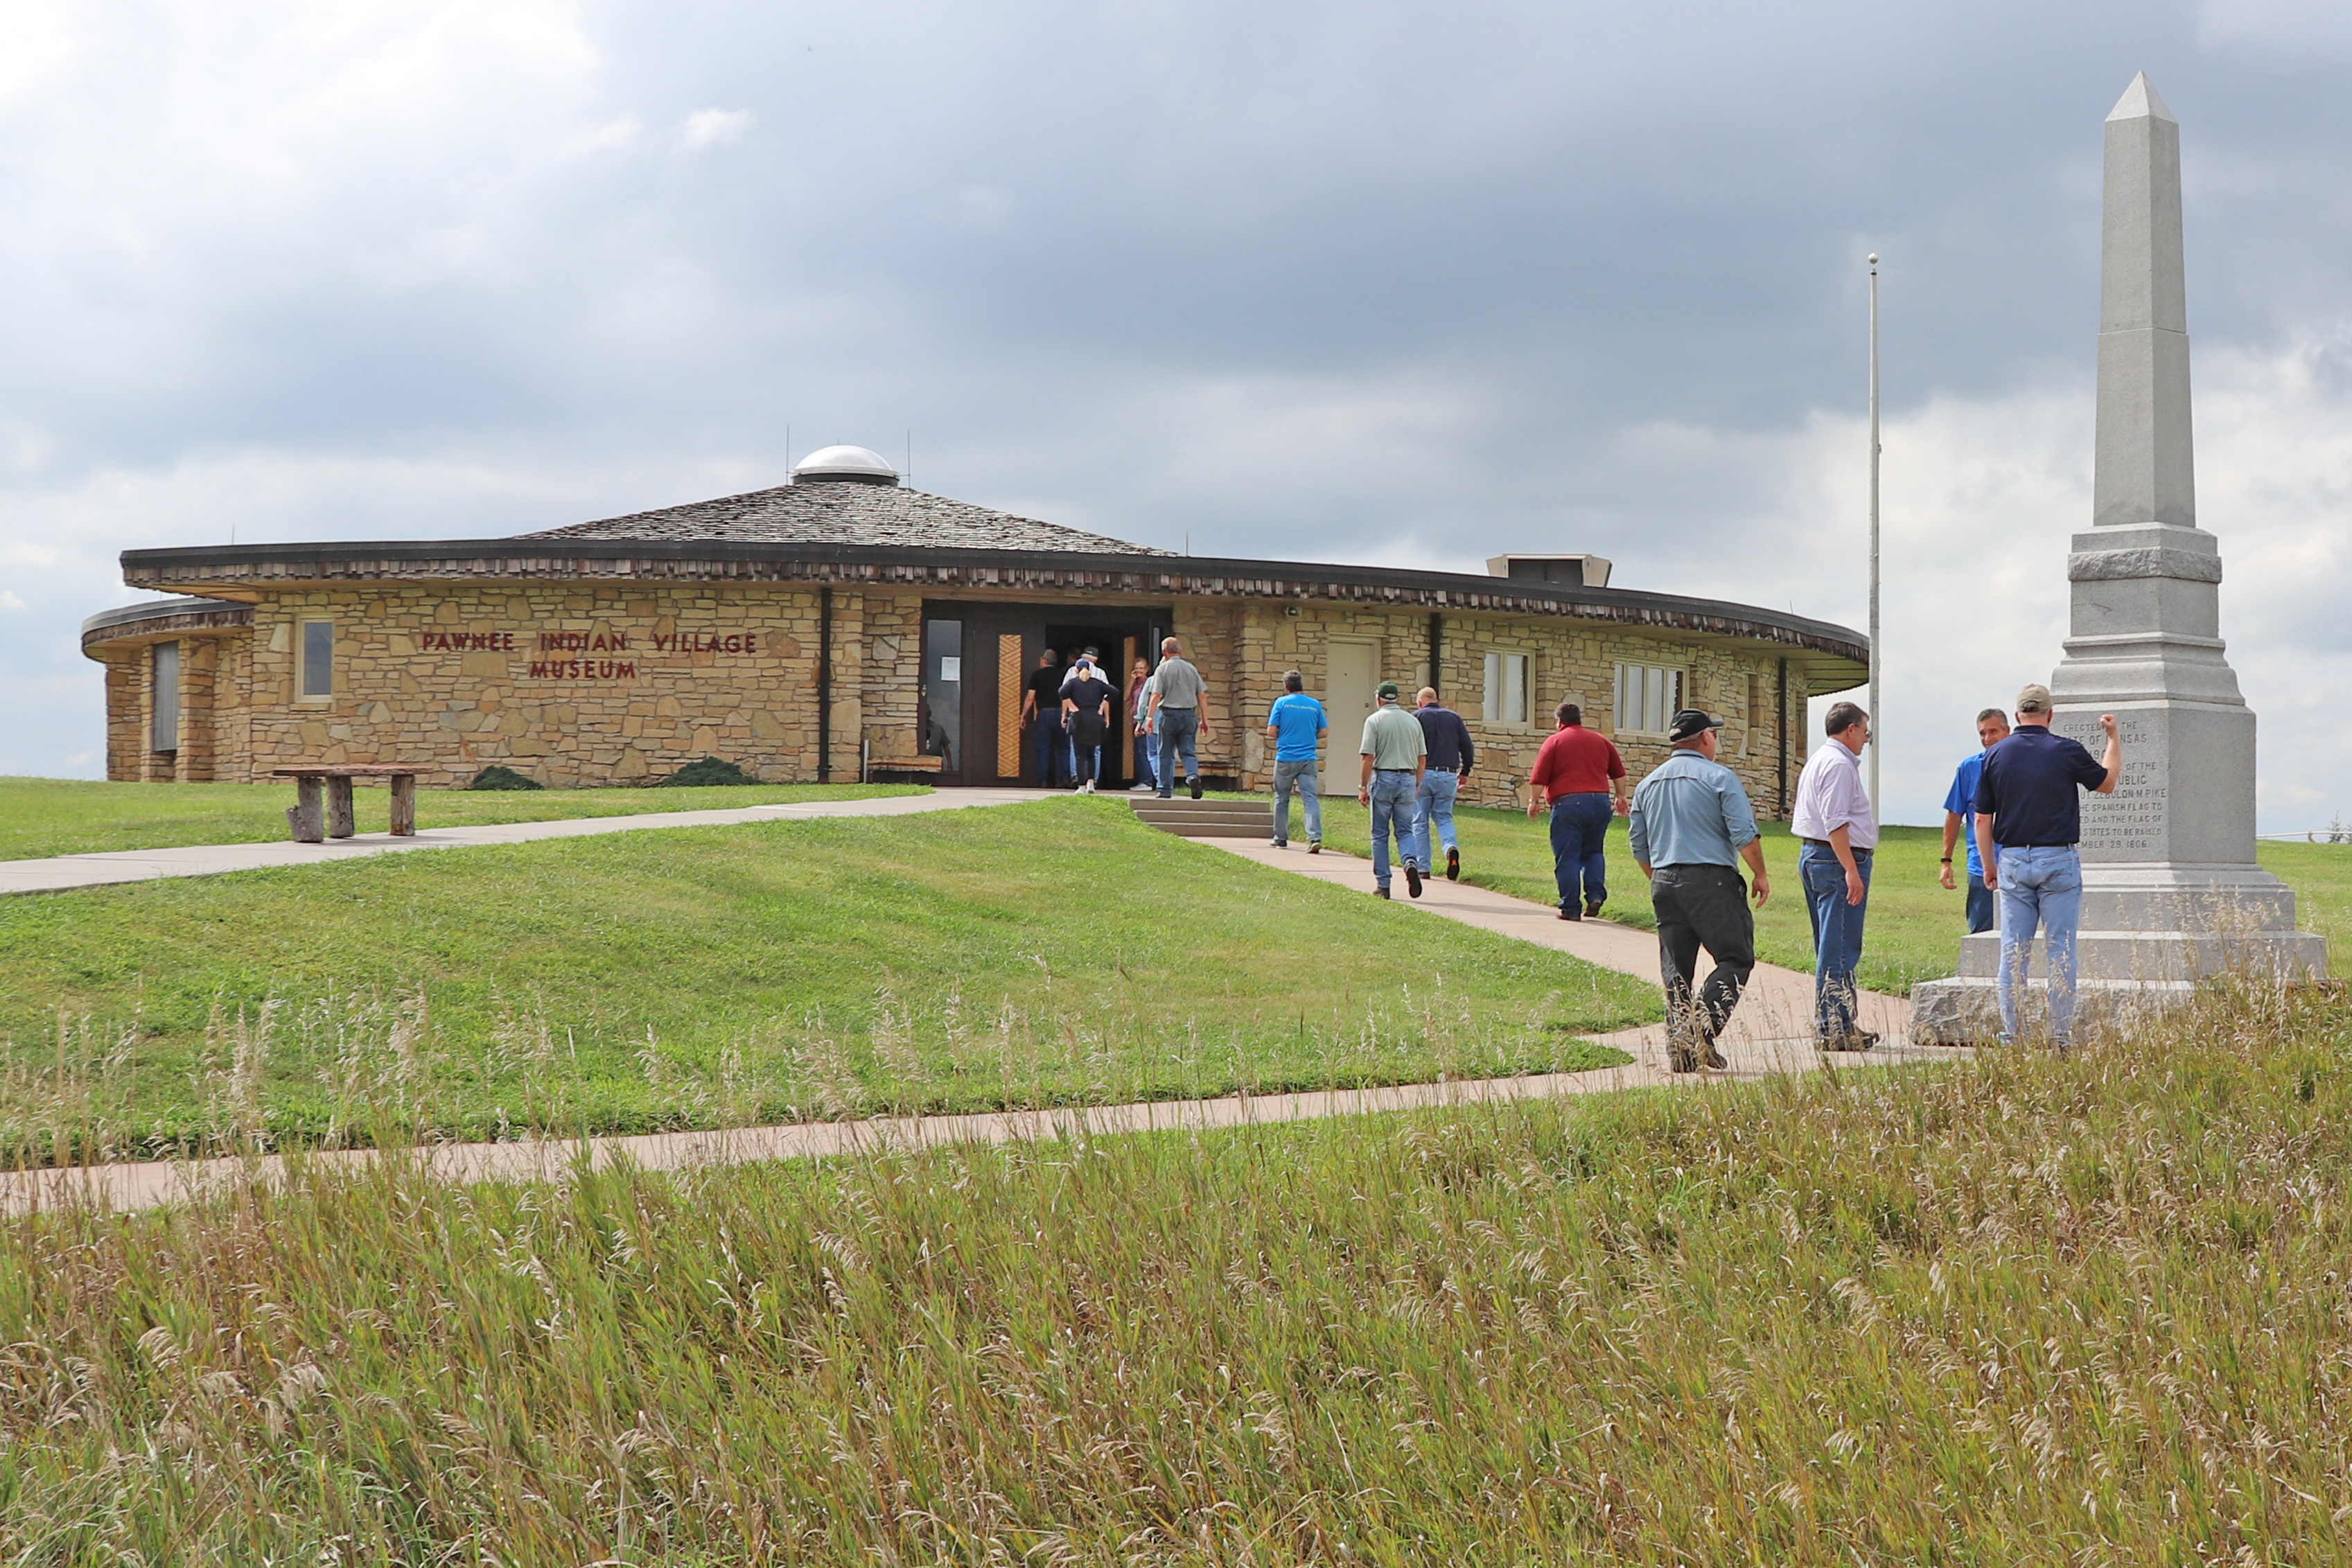 Pawnee Indian Museum State Historic Site.